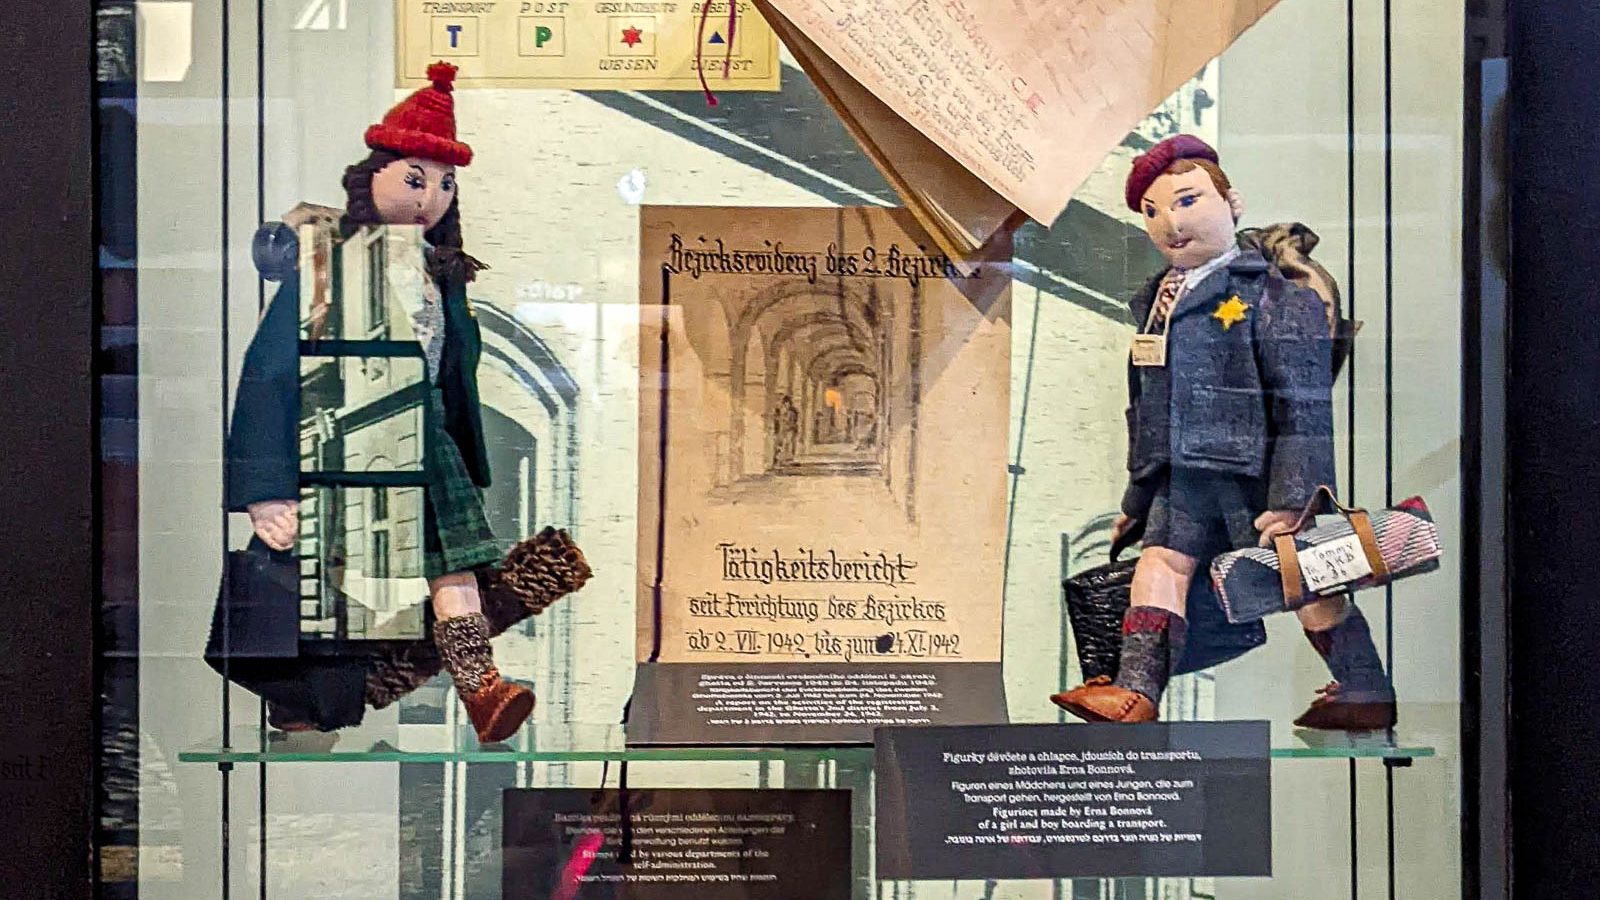 dolls depicting persecuted jews inside the Terezin ghetto museum